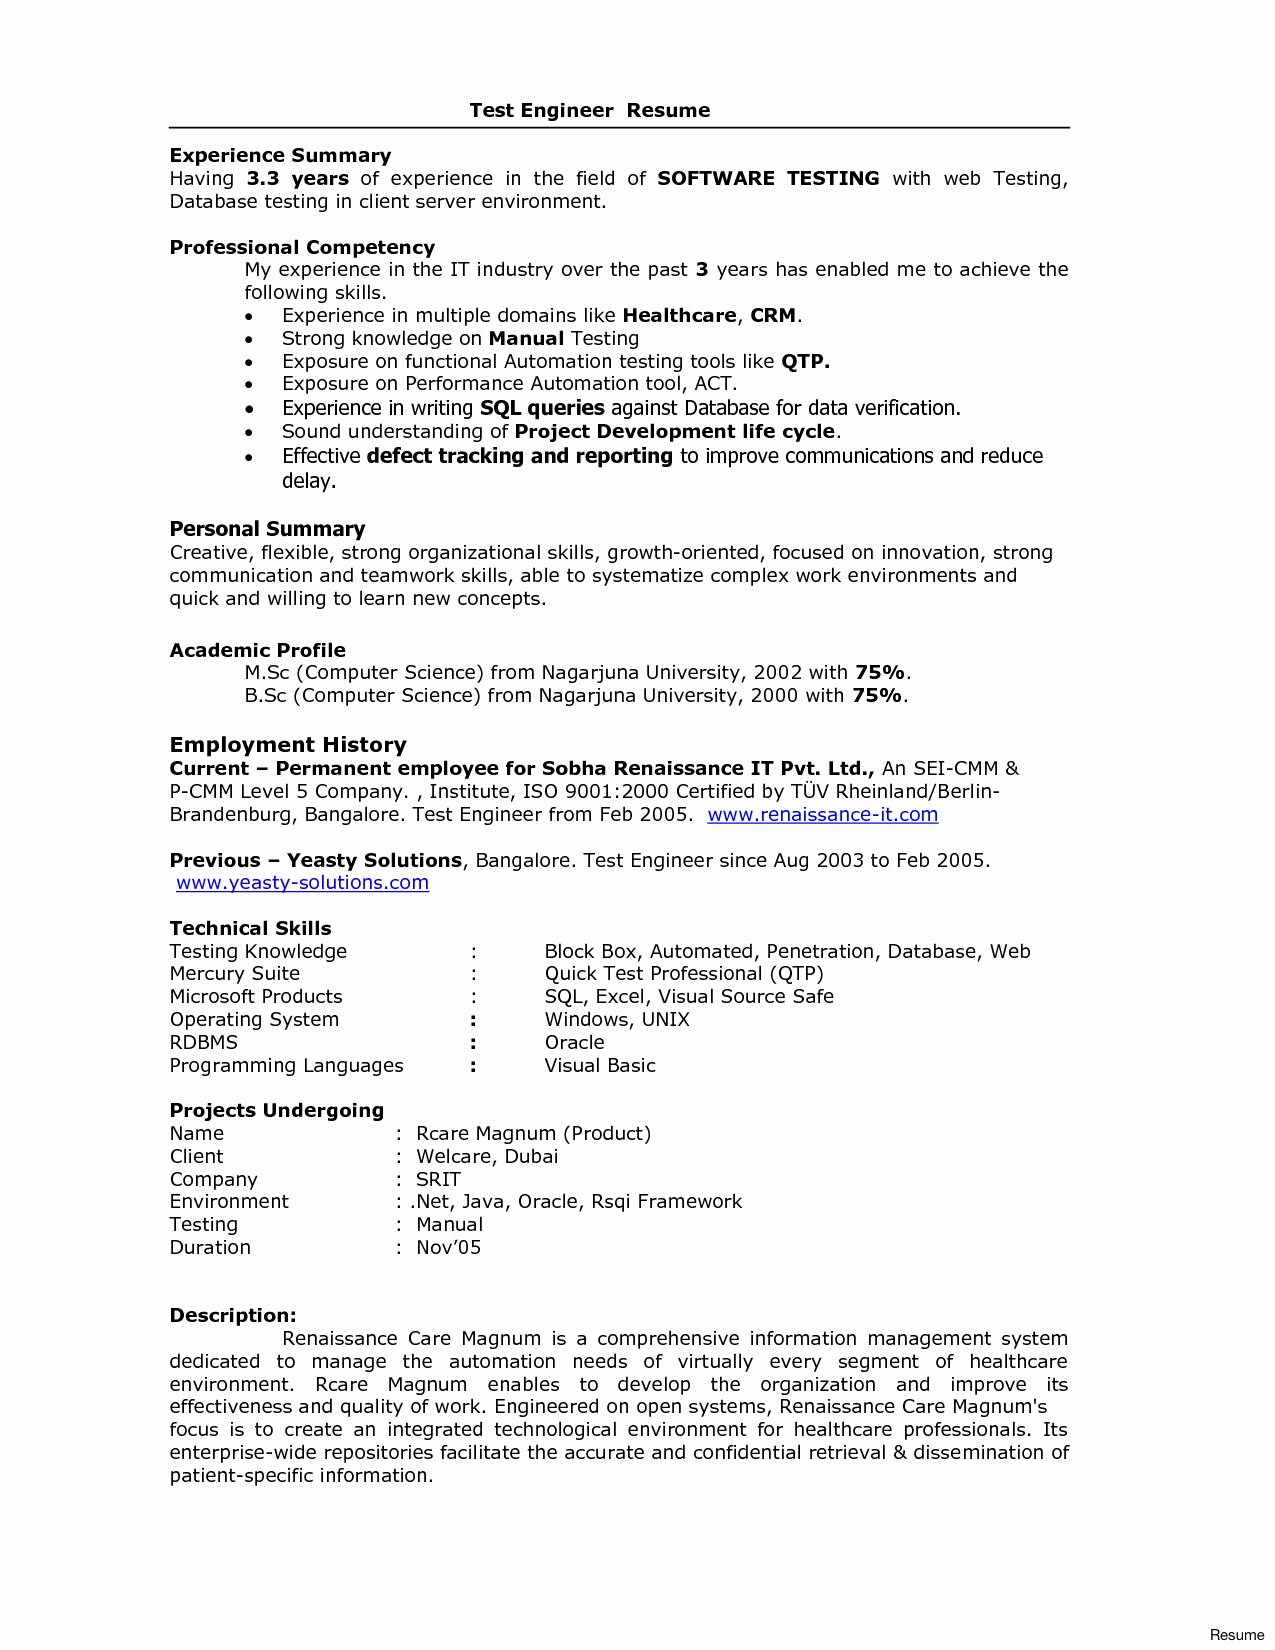 3 Year Experience Resume Format 